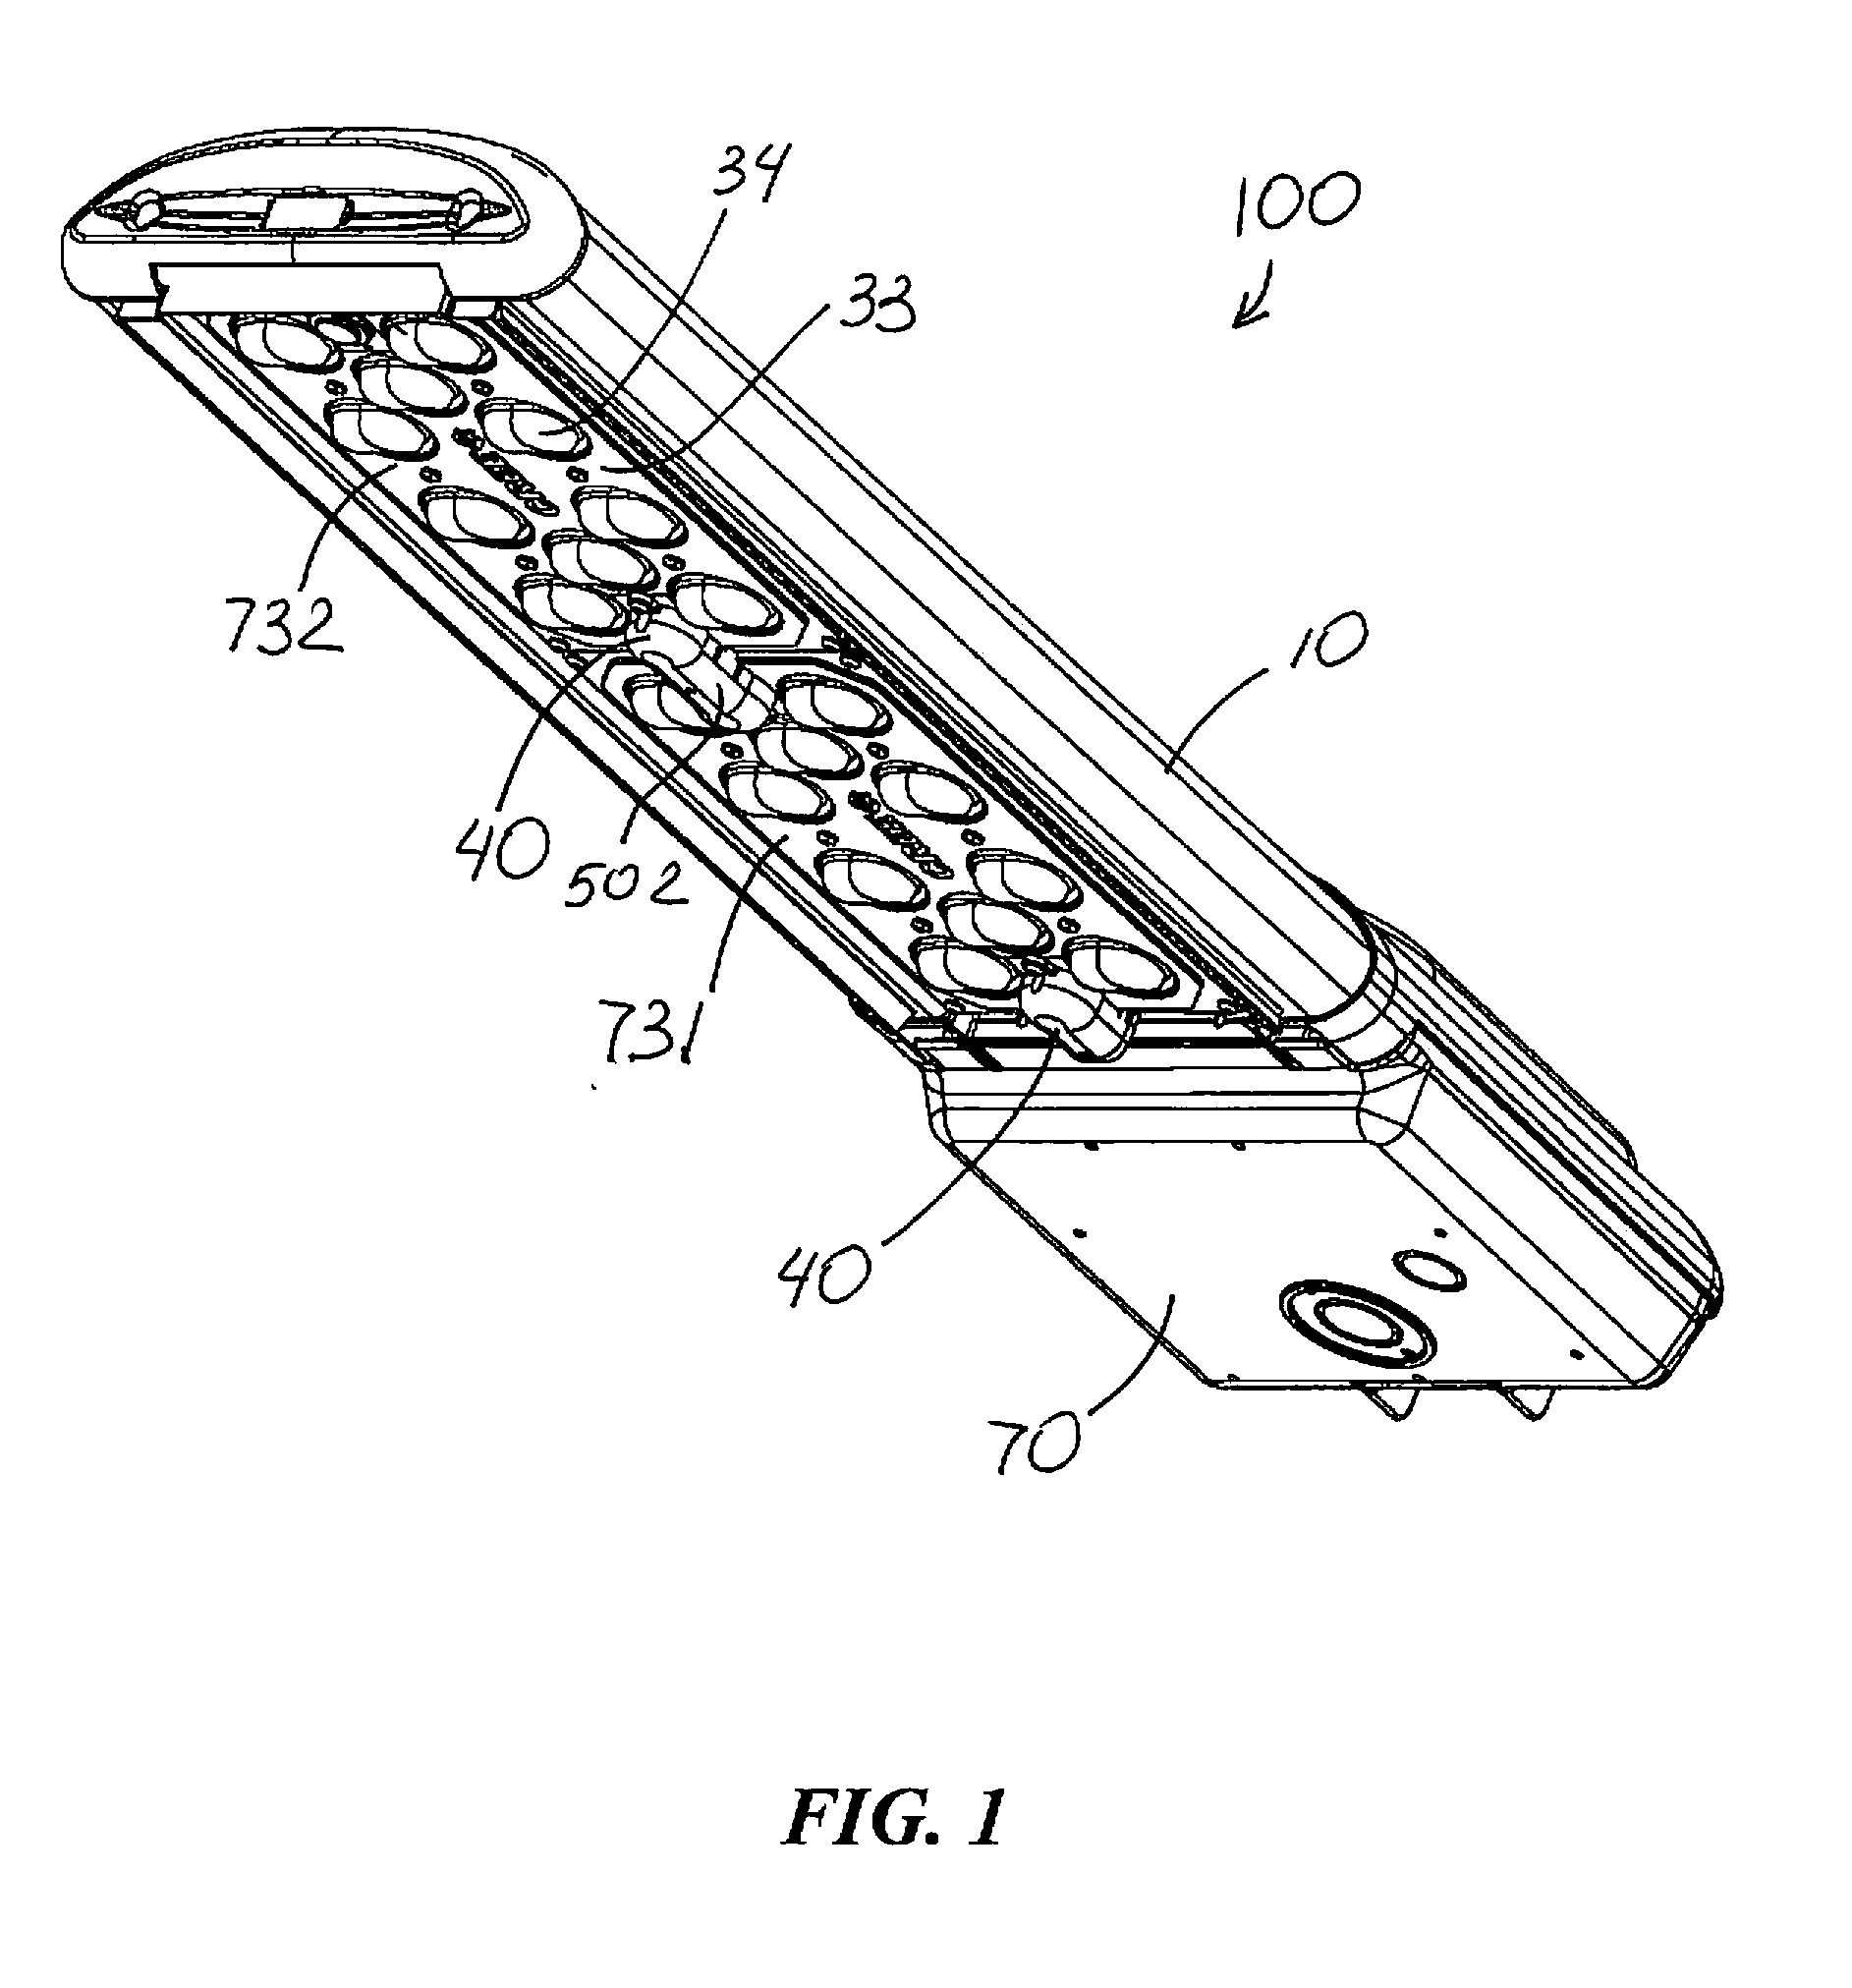 LED light fixtures with arrangement for electrical connection